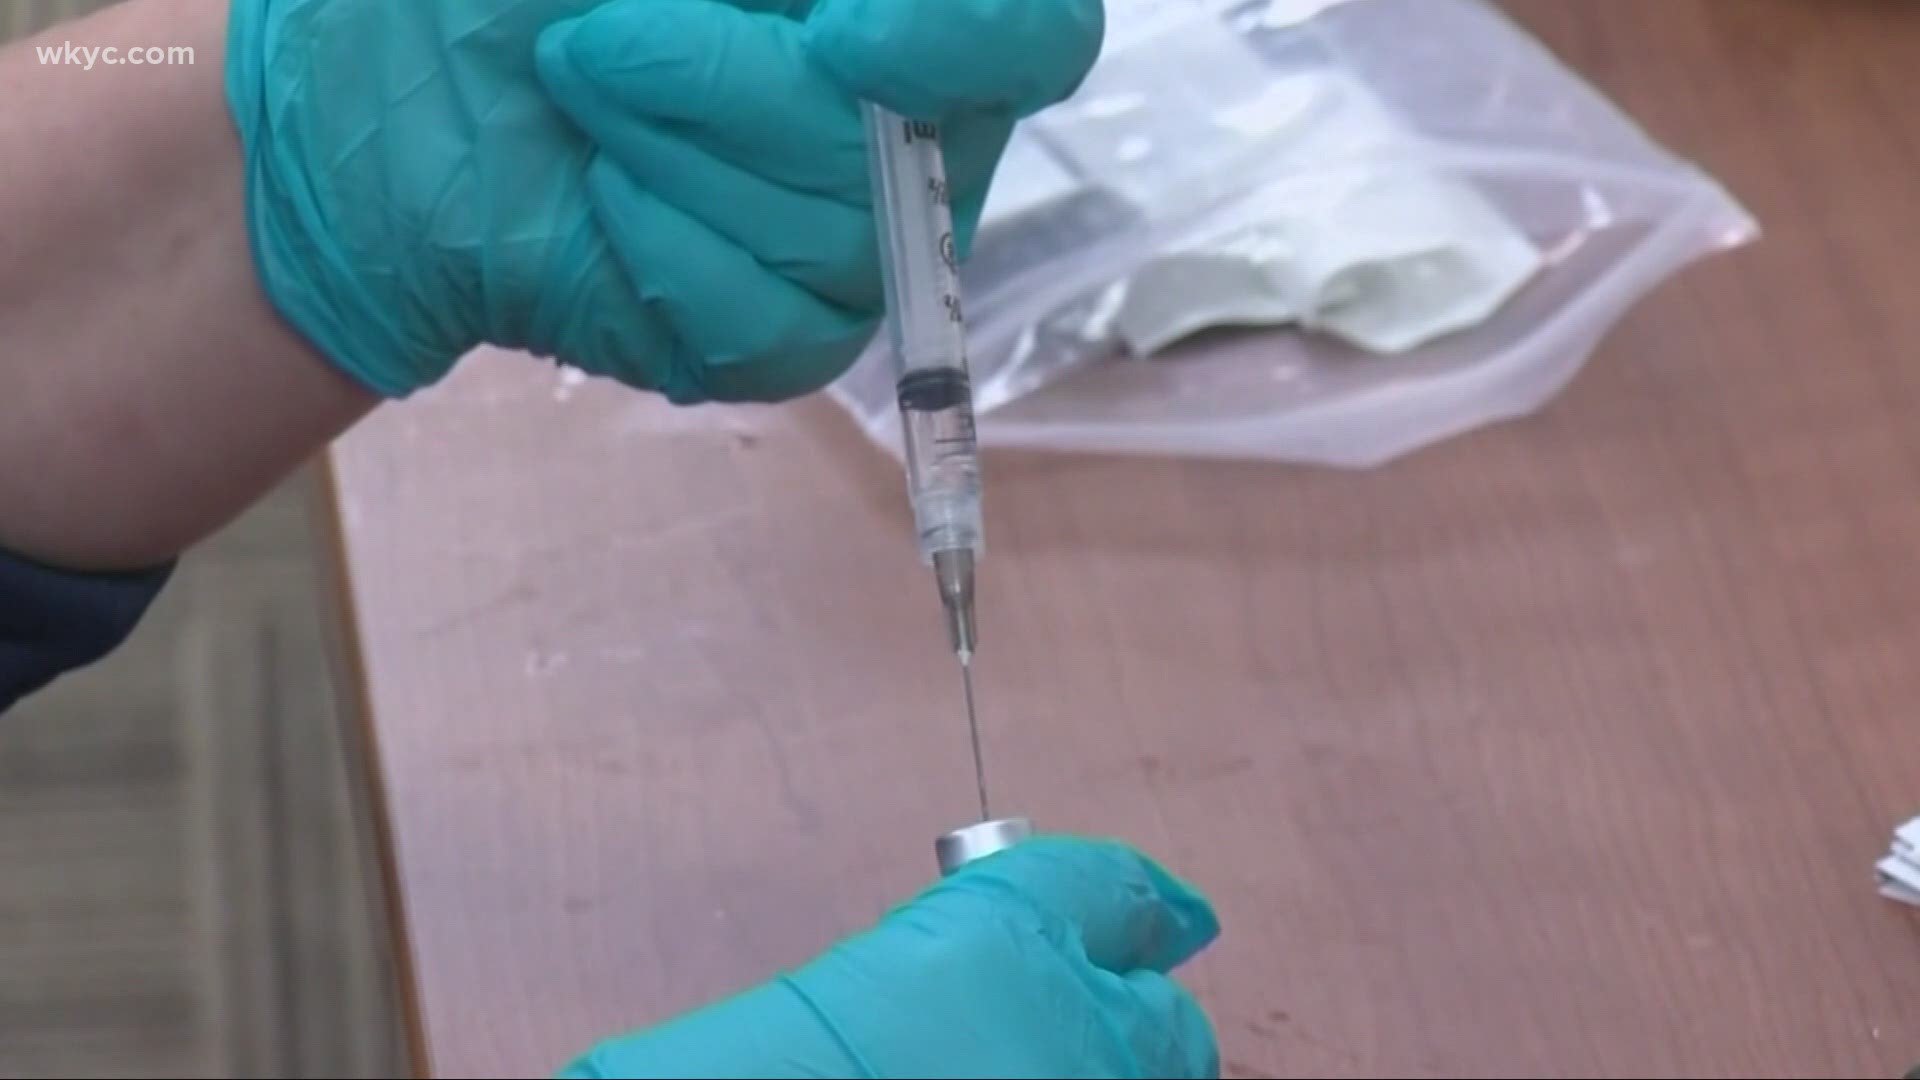 Local health departments and other providers are expecting to GET more of the vaccine this week. Governor DeWine urged providers to expand their schedules.